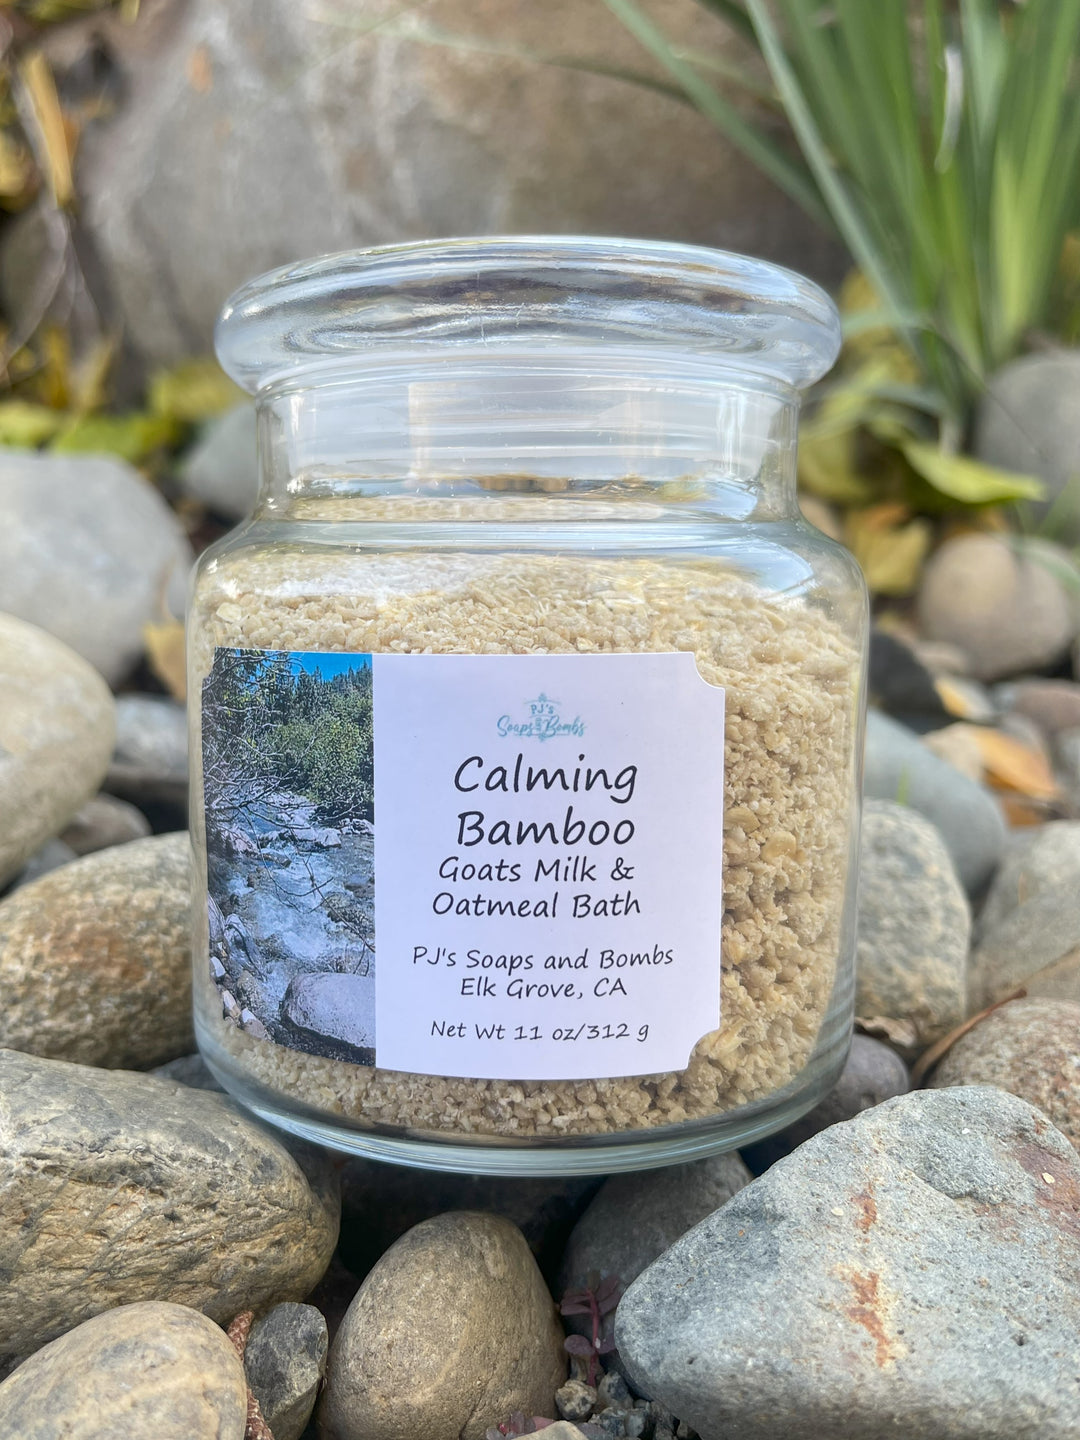 Soothing Goats Milk and Oatmeal Bath, Calming Bamboo Scent